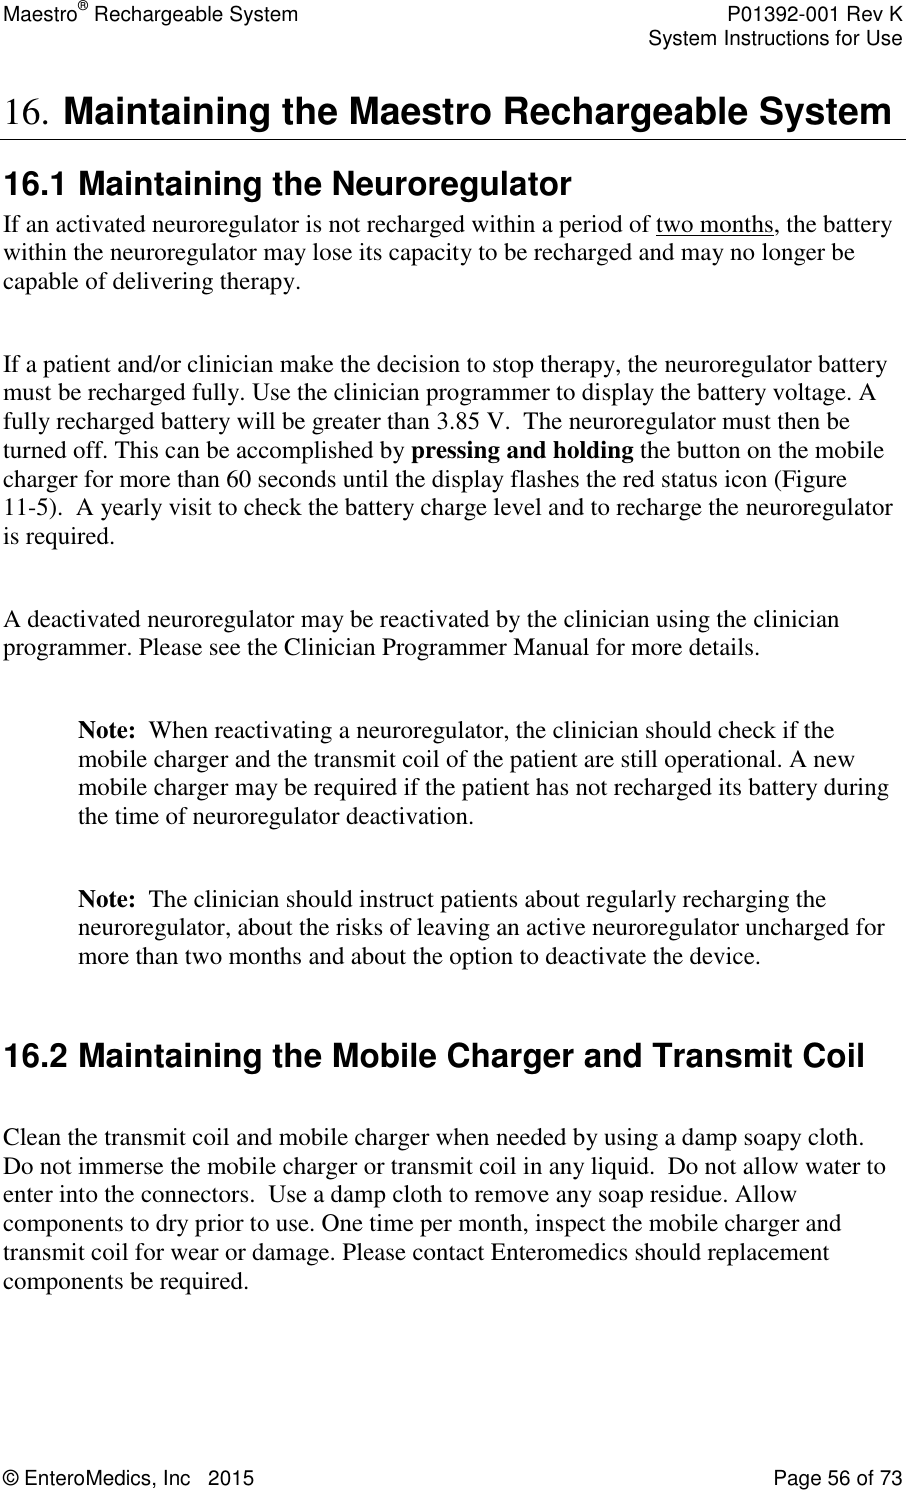 Maestro® Rechargeable System    P01392-001 Rev K     System Instructions for Use  © EnteroMedics, Inc   2015  Page 56 of 73  16. Maintaining the Maestro Rechargeable System  16.1 Maintaining the Neuroregulator If an activated neuroregulator is not recharged within a period of two months, the battery within the neuroregulator may lose its capacity to be recharged and may no longer be capable of delivering therapy.  If a patient and/or clinician make the decision to stop therapy, the neuroregulator battery must be recharged fully. Use the clinician programmer to display the battery voltage. A fully recharged battery will be greater than 3.85 V.  The neuroregulator must then be turned off. This can be accomplished by pressing and holding the button on the mobile charger for more than 60 seconds until the display flashes the red status icon (Figure 11-5).  A yearly visit to check the battery charge level and to recharge the neuroregulator is required.  A deactivated neuroregulator may be reactivated by the clinician using the clinician programmer. Please see the Clinician Programmer Manual for more details.   Note:  When reactivating a neuroregulator, the clinician should check if the mobile charger and the transmit coil of the patient are still operational. A new mobile charger may be required if the patient has not recharged its battery during the time of neuroregulator deactivation.  Note:  The clinician should instruct patients about regularly recharging the neuroregulator, about the risks of leaving an active neuroregulator uncharged for more than two months and about the option to deactivate the device.  16.2 Maintaining the Mobile Charger and Transmit Coil  Clean the transmit coil and mobile charger when needed by using a damp soapy cloth.  Do not immerse the mobile charger or transmit coil in any liquid.  Do not allow water to enter into the connectors.  Use a damp cloth to remove any soap residue. Allow components to dry prior to use. One time per month, inspect the mobile charger and transmit coil for wear or damage. Please contact Enteromedics should replacement components be required.   